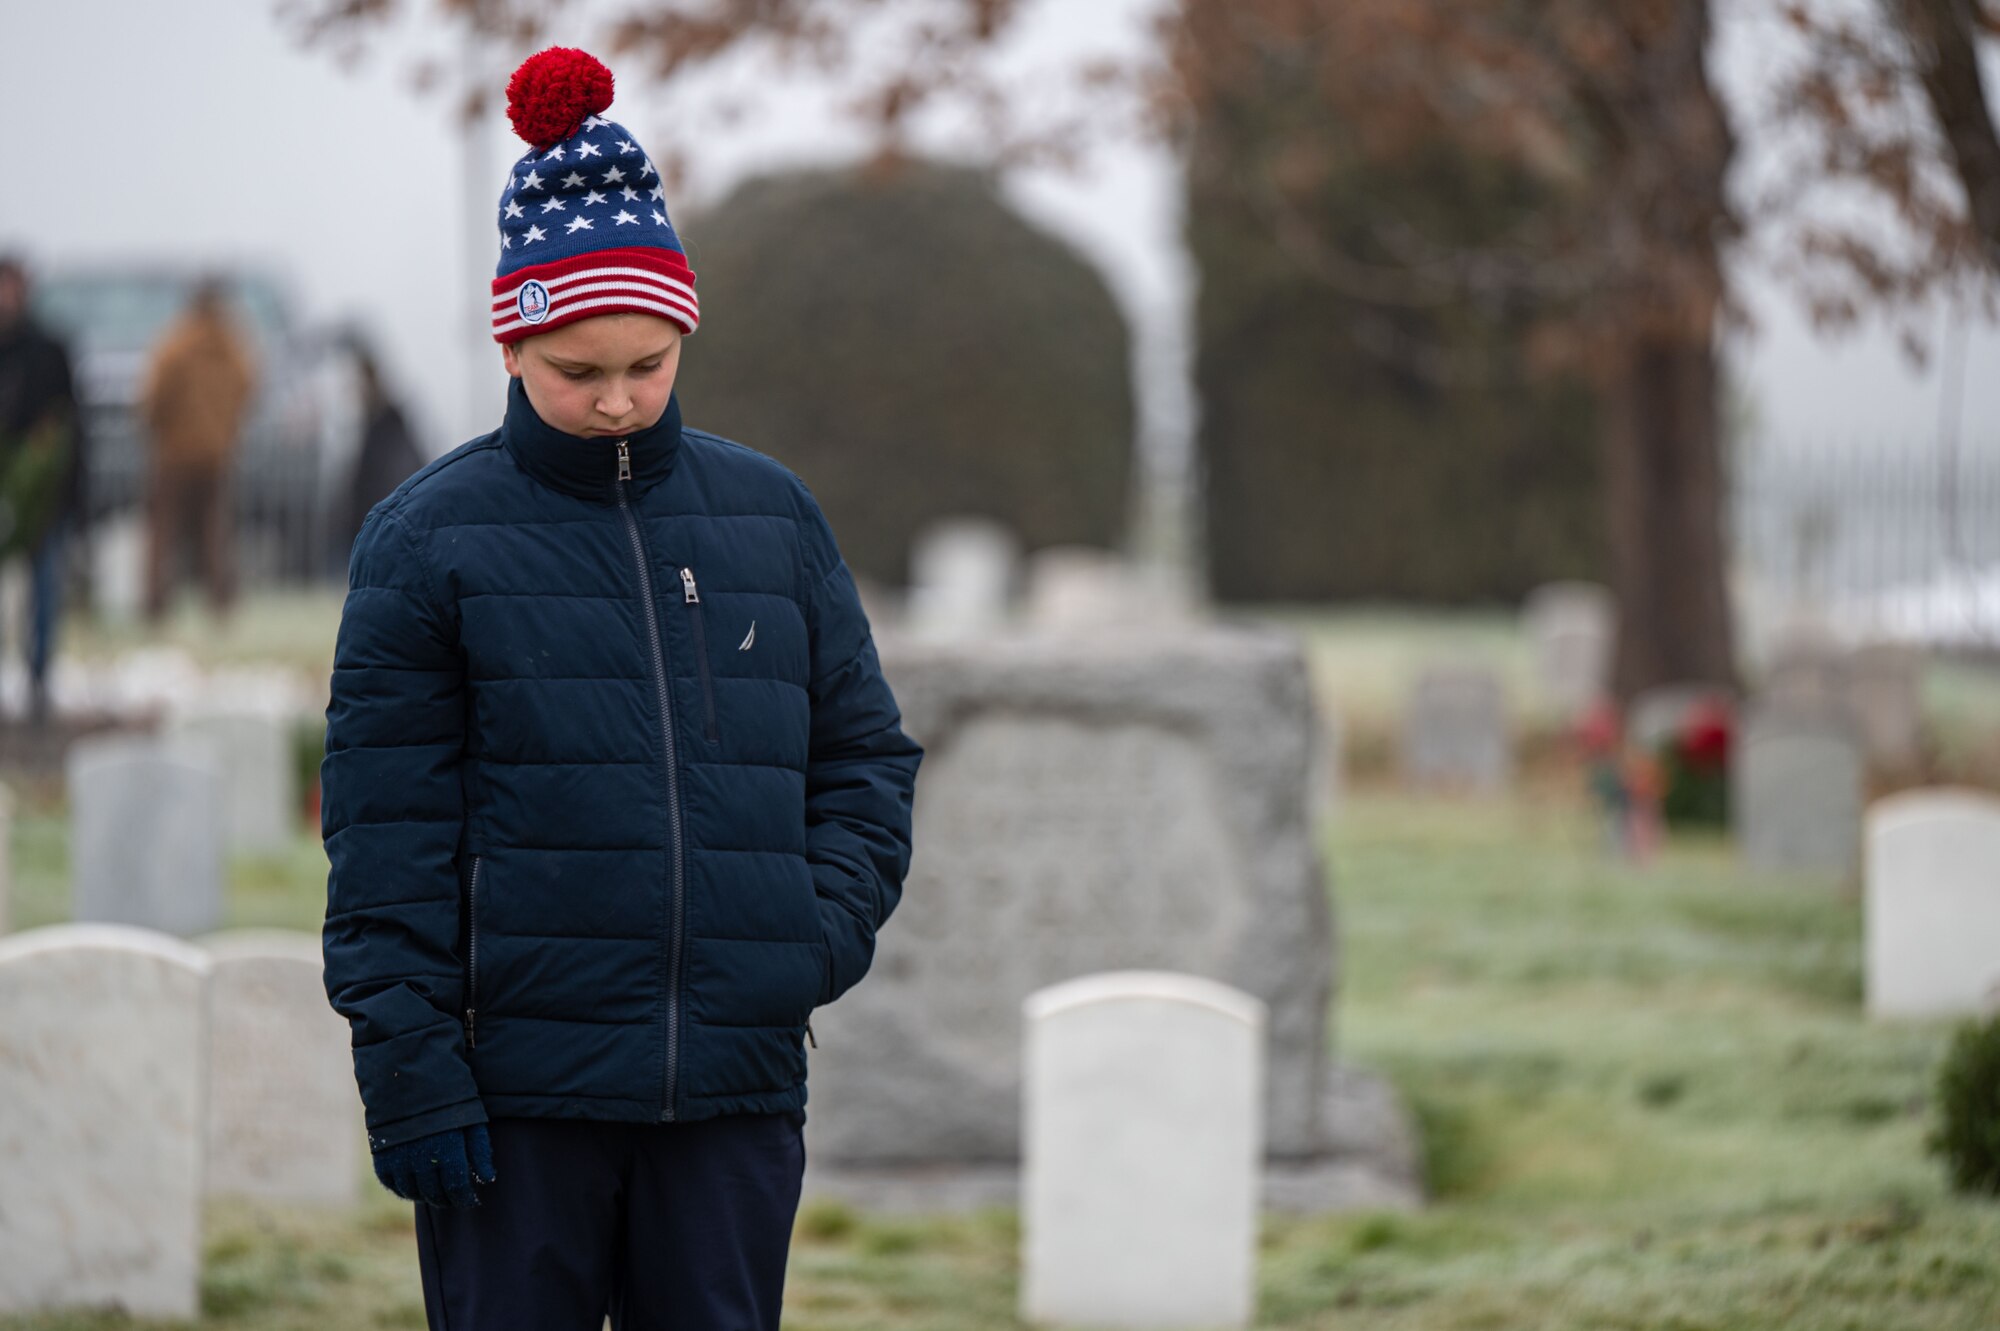 A child stands in a cemetery